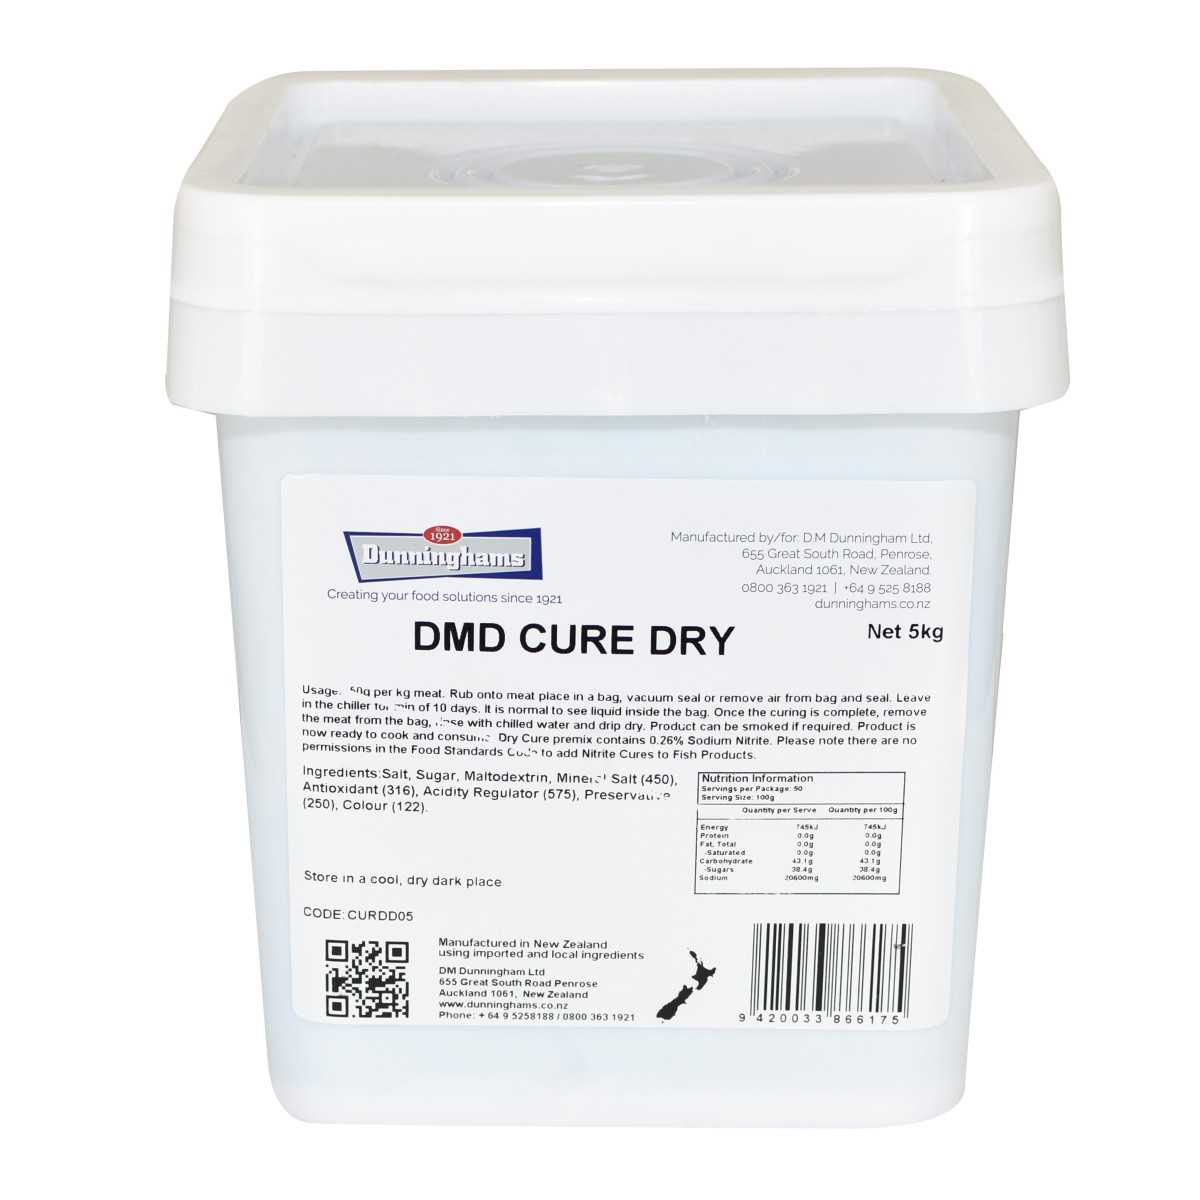 DMD CURE DRY 5kg